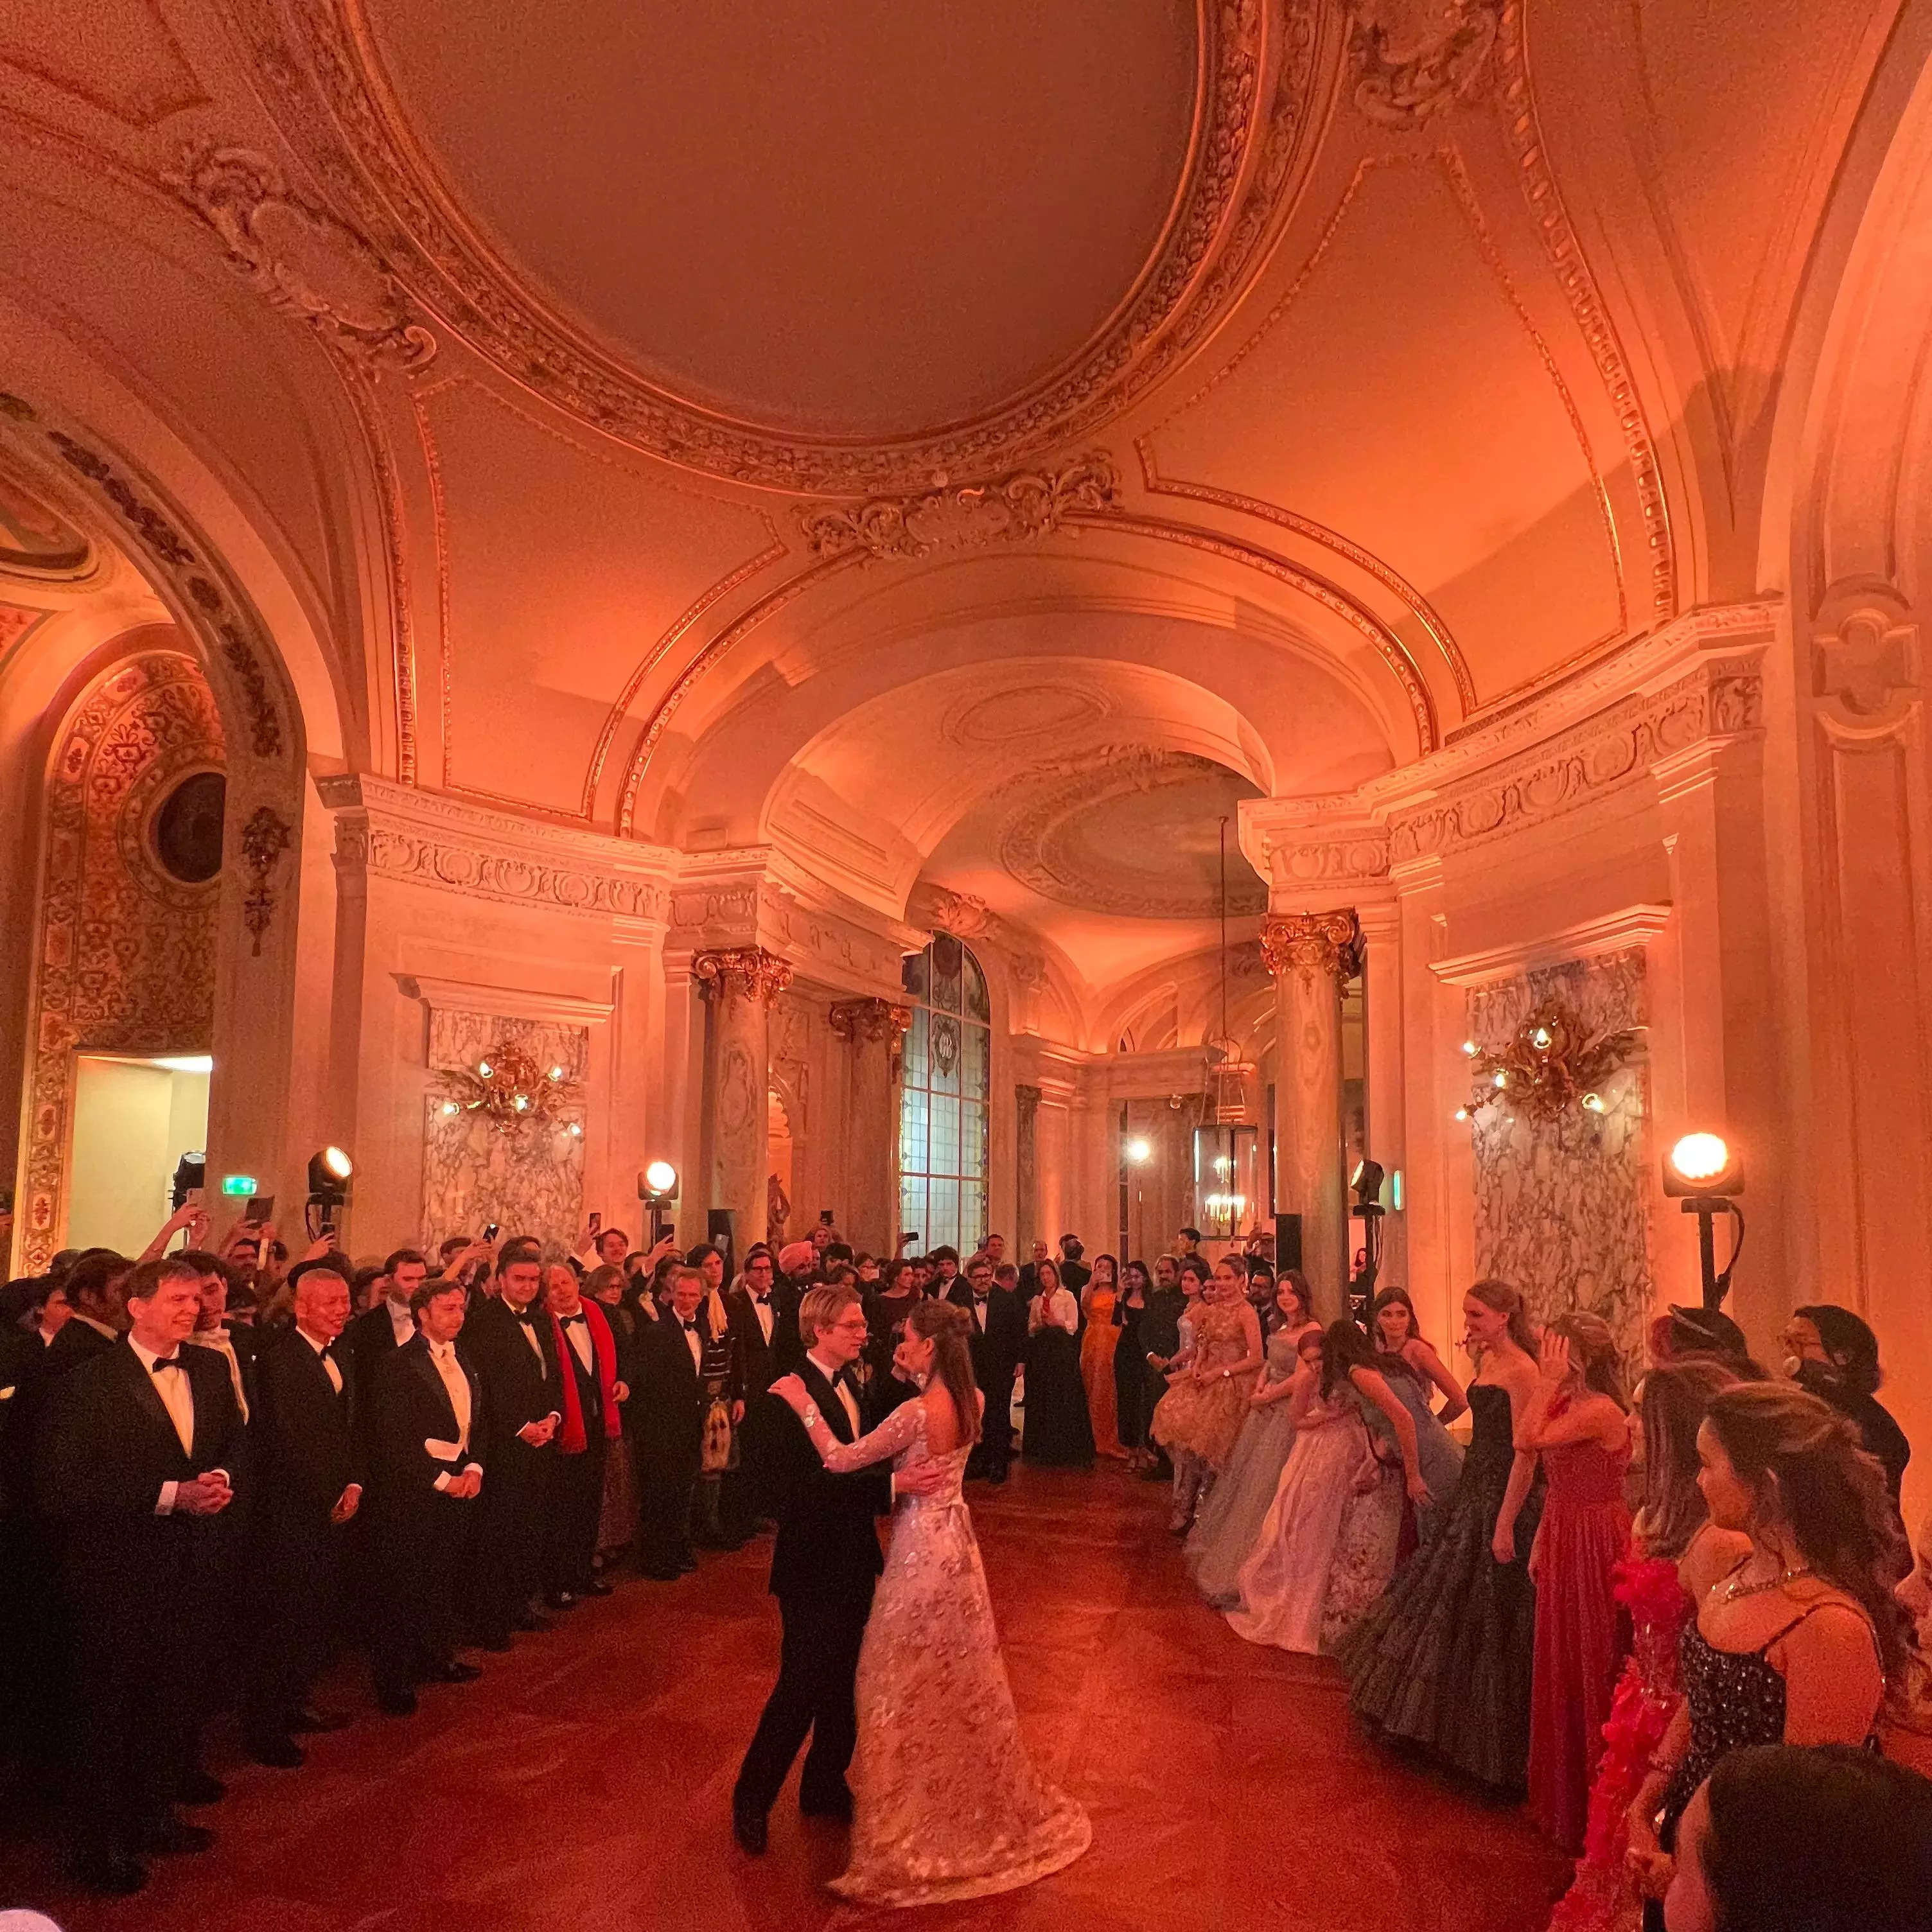 HRH Princess Hélène of Orleans dancing with her father, Prince Charles Louis of Orléans, at Le Bal.